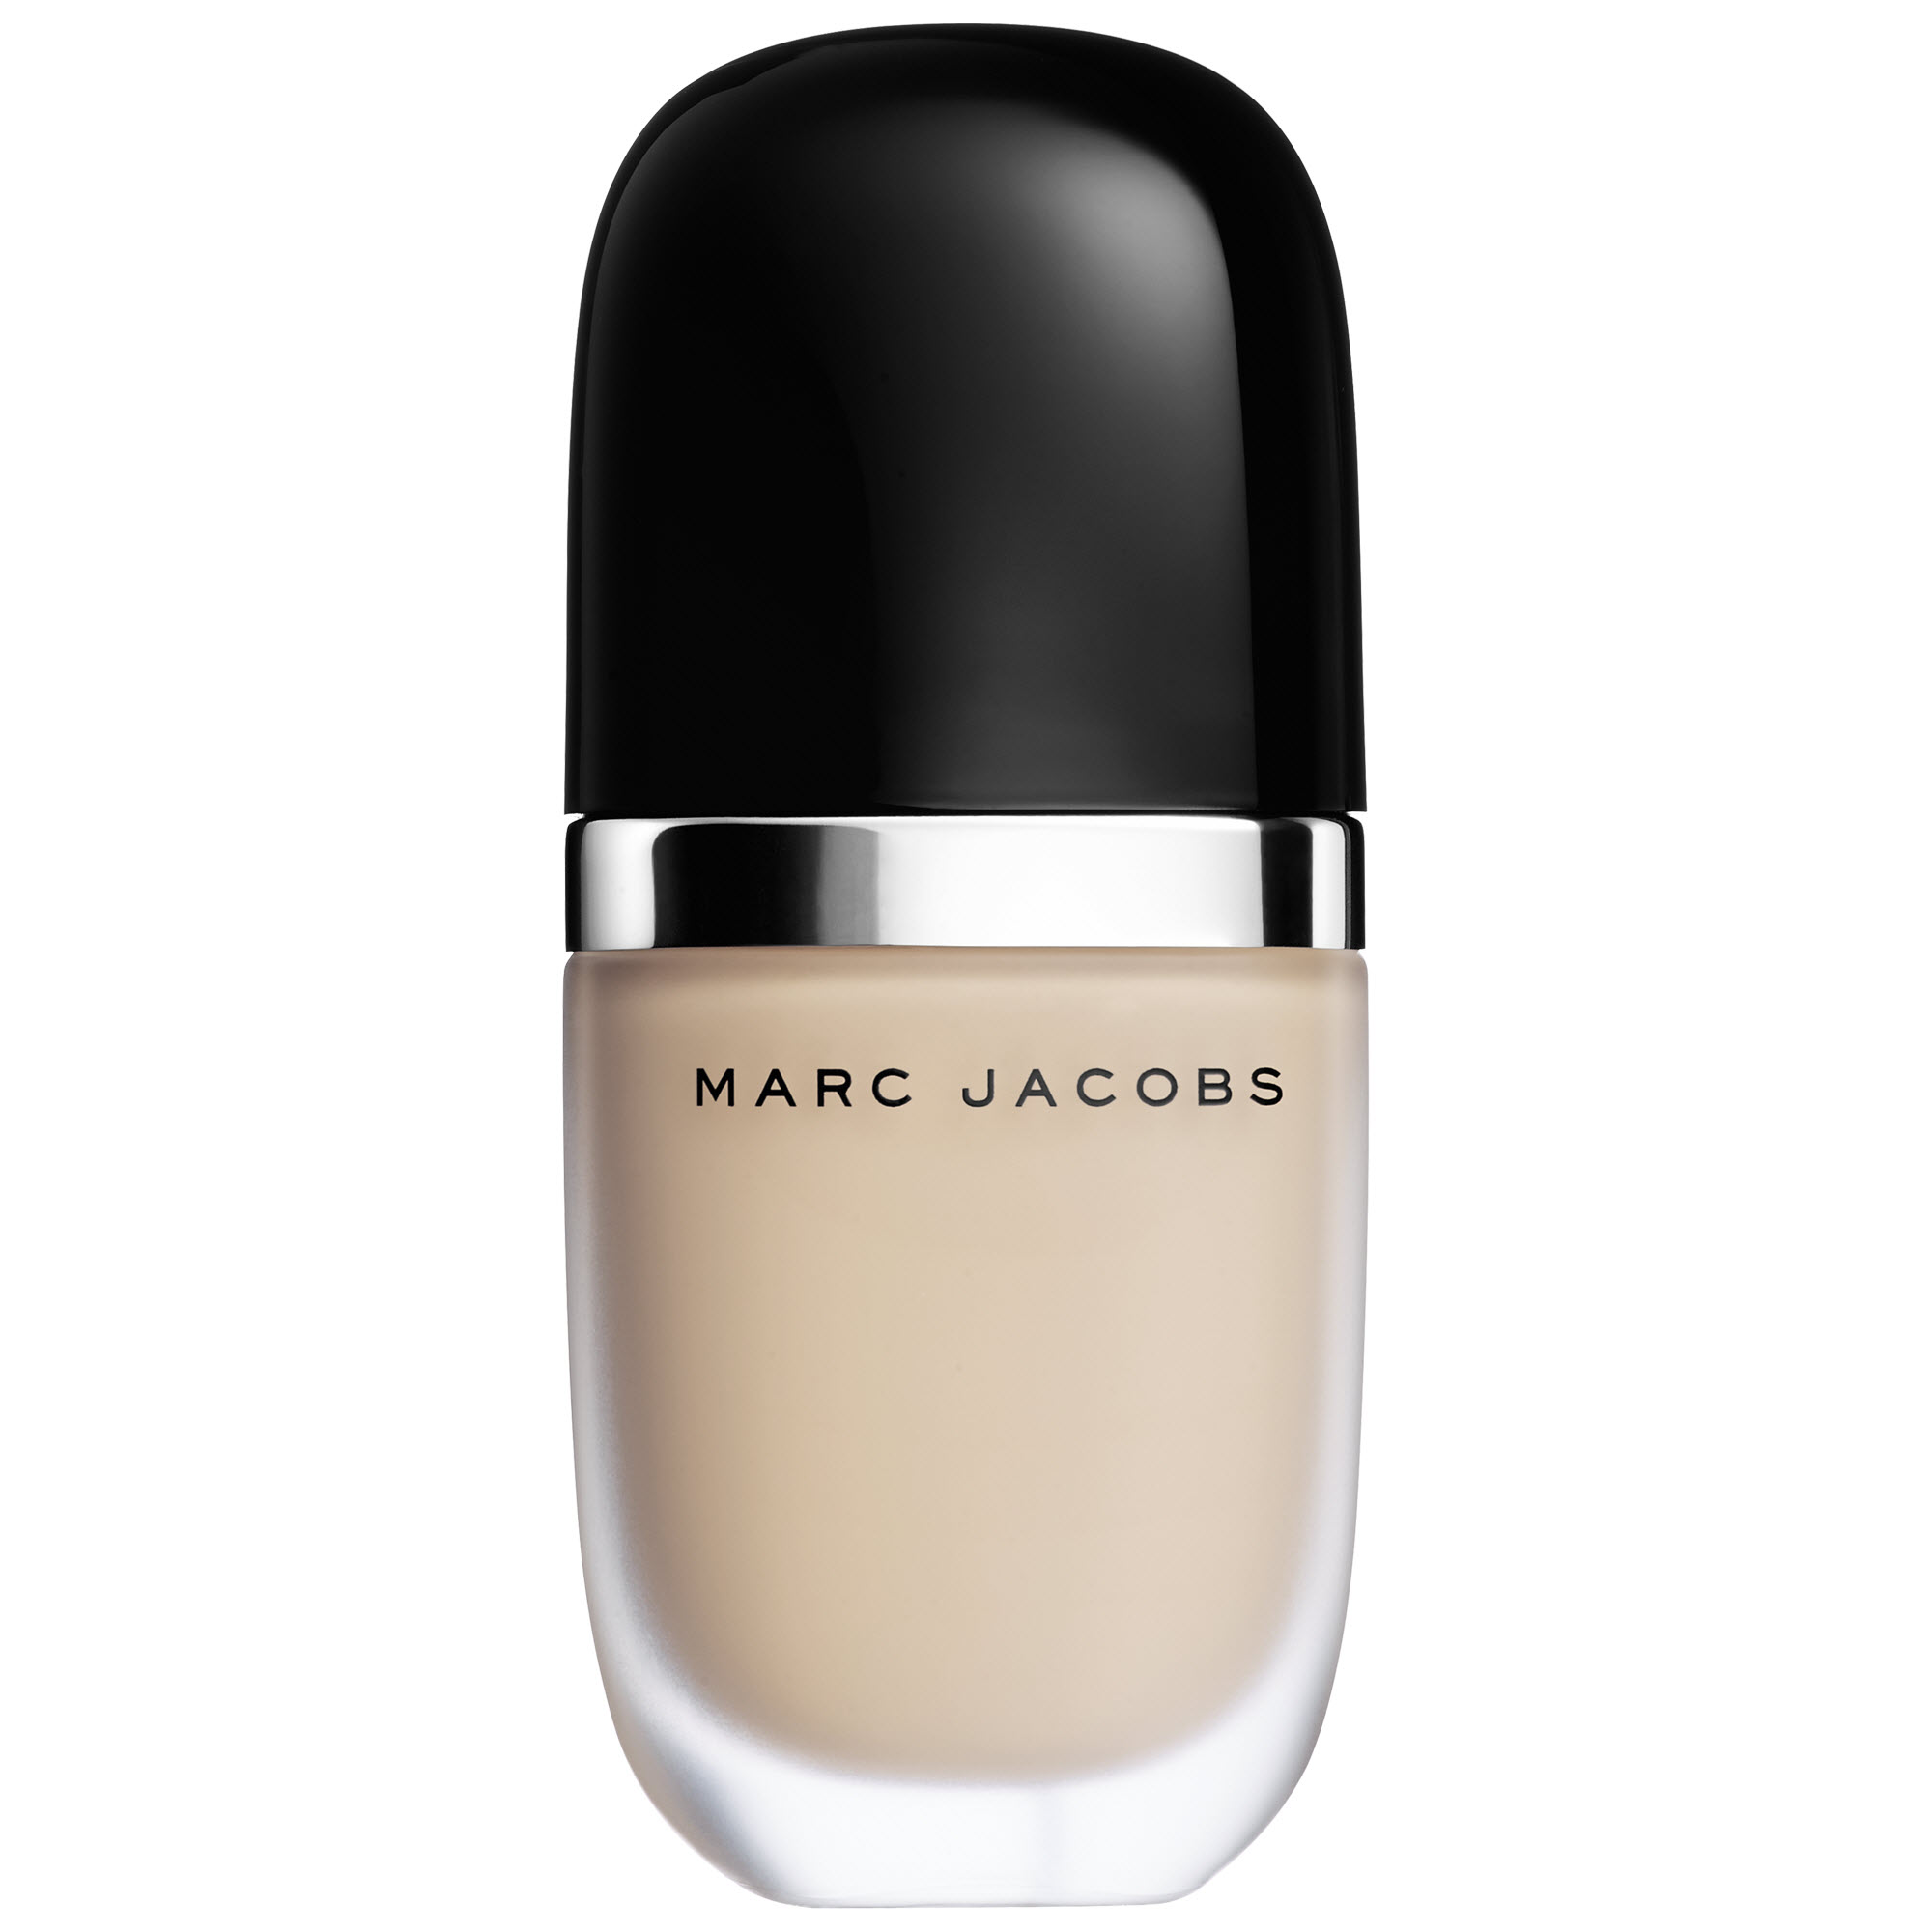 Marc Jacobs Beauty Genius Gel Super-Charged Foundation in 26 Bisque Medium